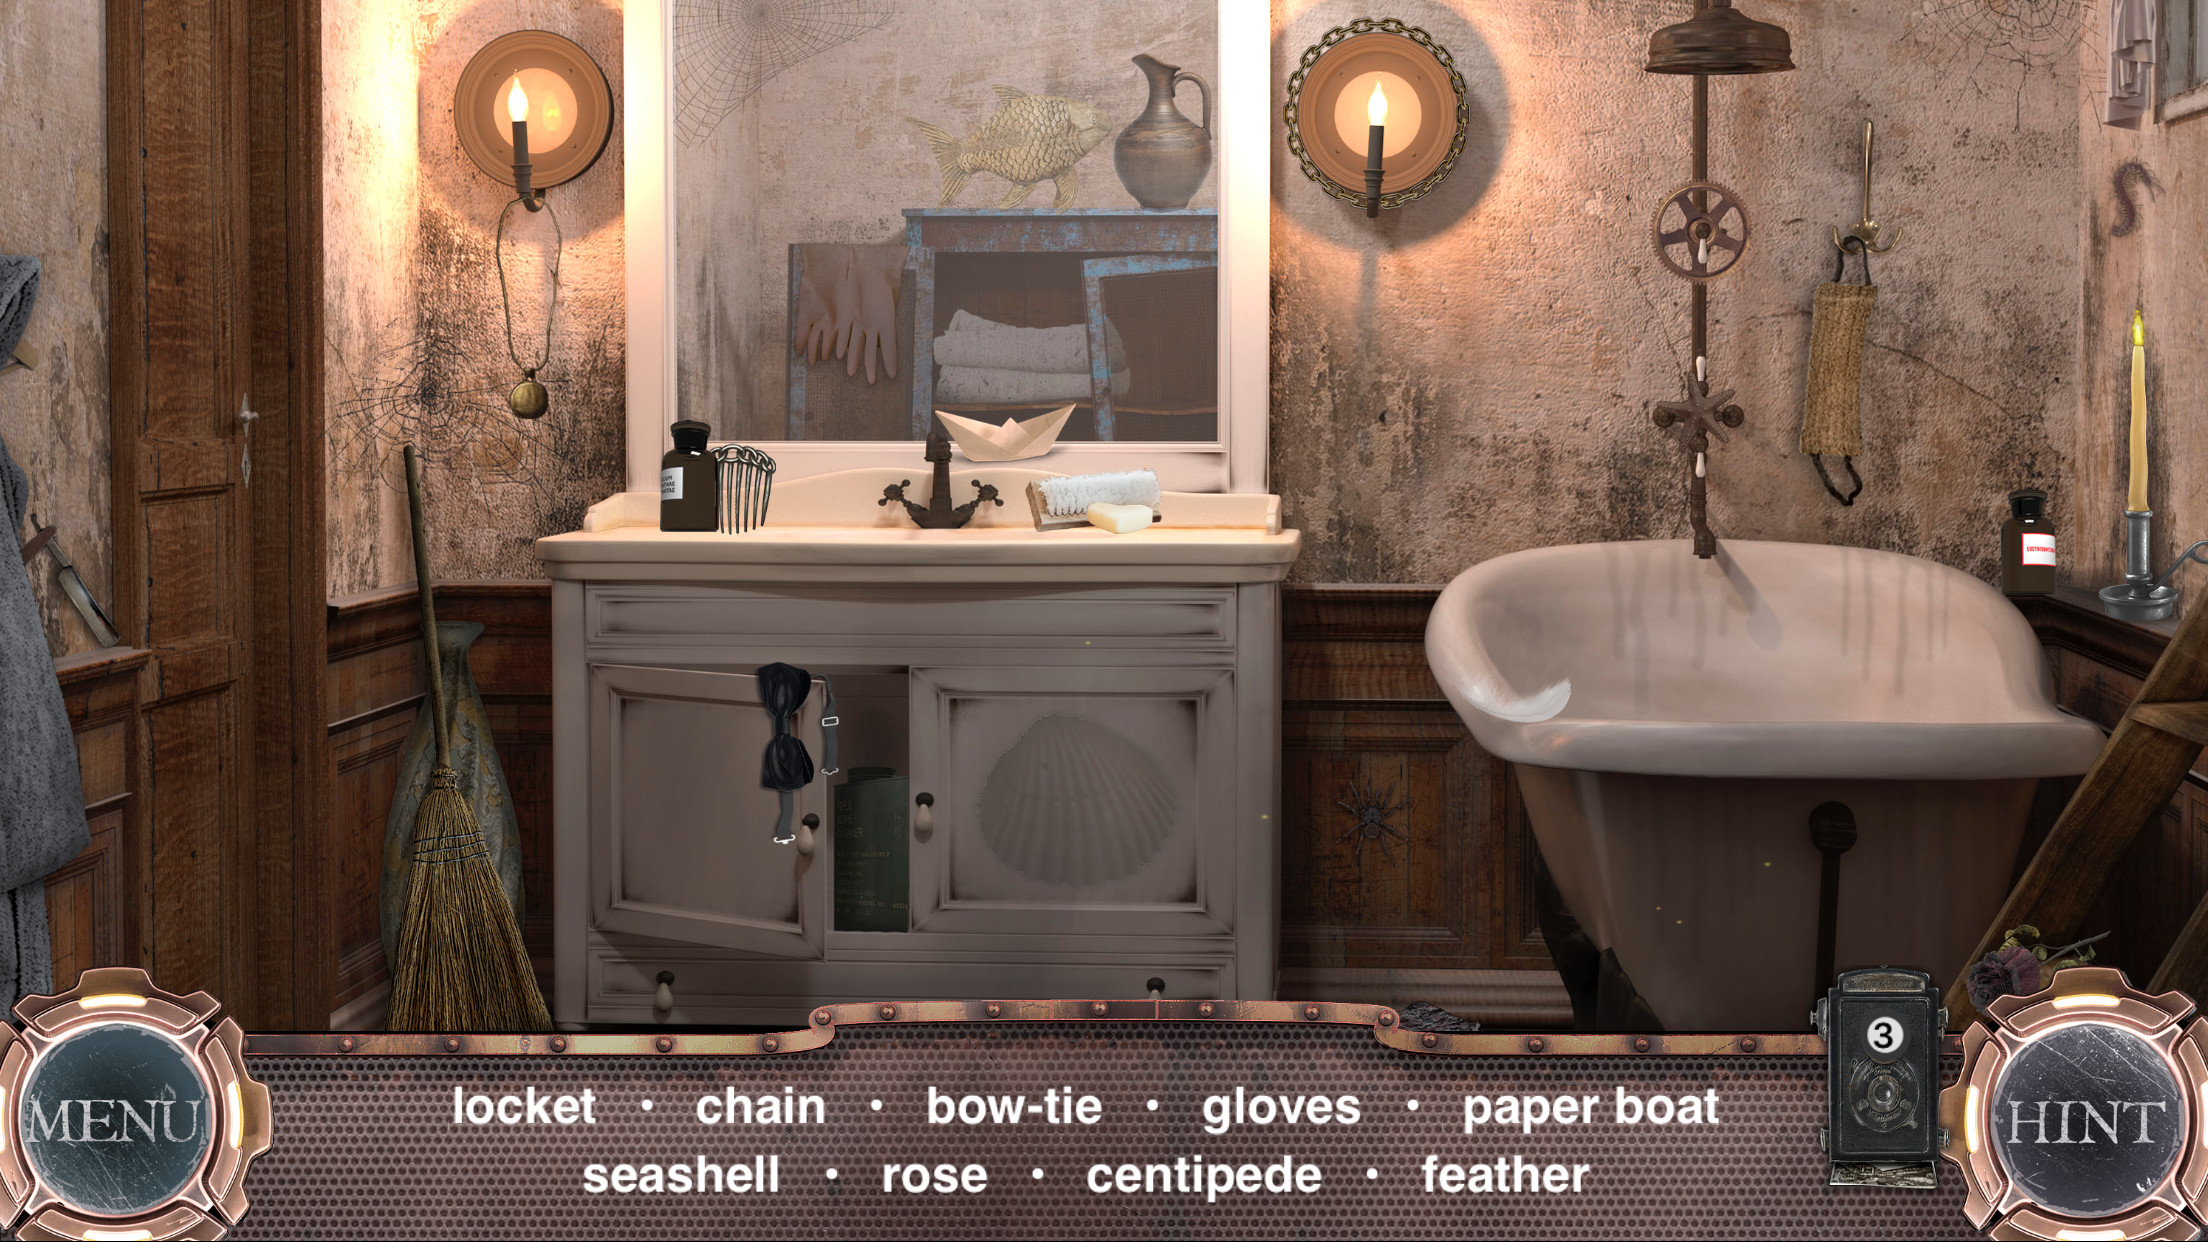 Time Machine - Find Objects. Hidden Pictures Game screenshot